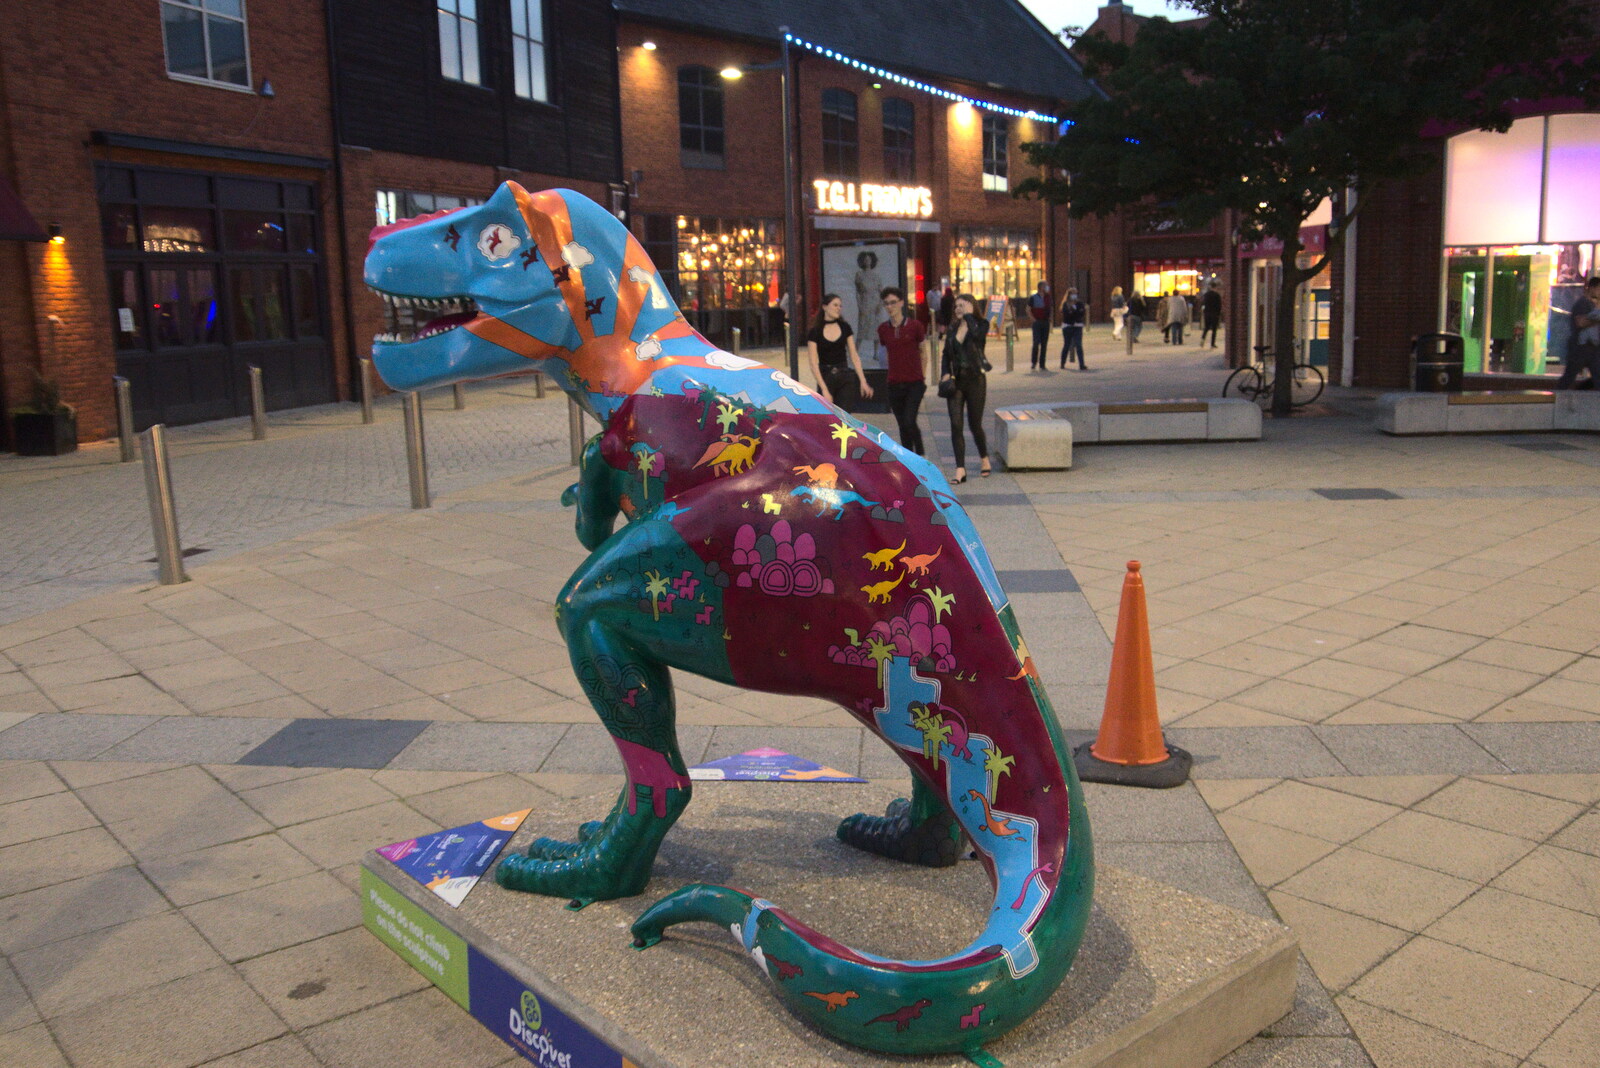 Part of the Dinosaur Trail in Norwich from A Trip to Nando's, Riverside, Norwich, Norfolk - 23rd July 2021